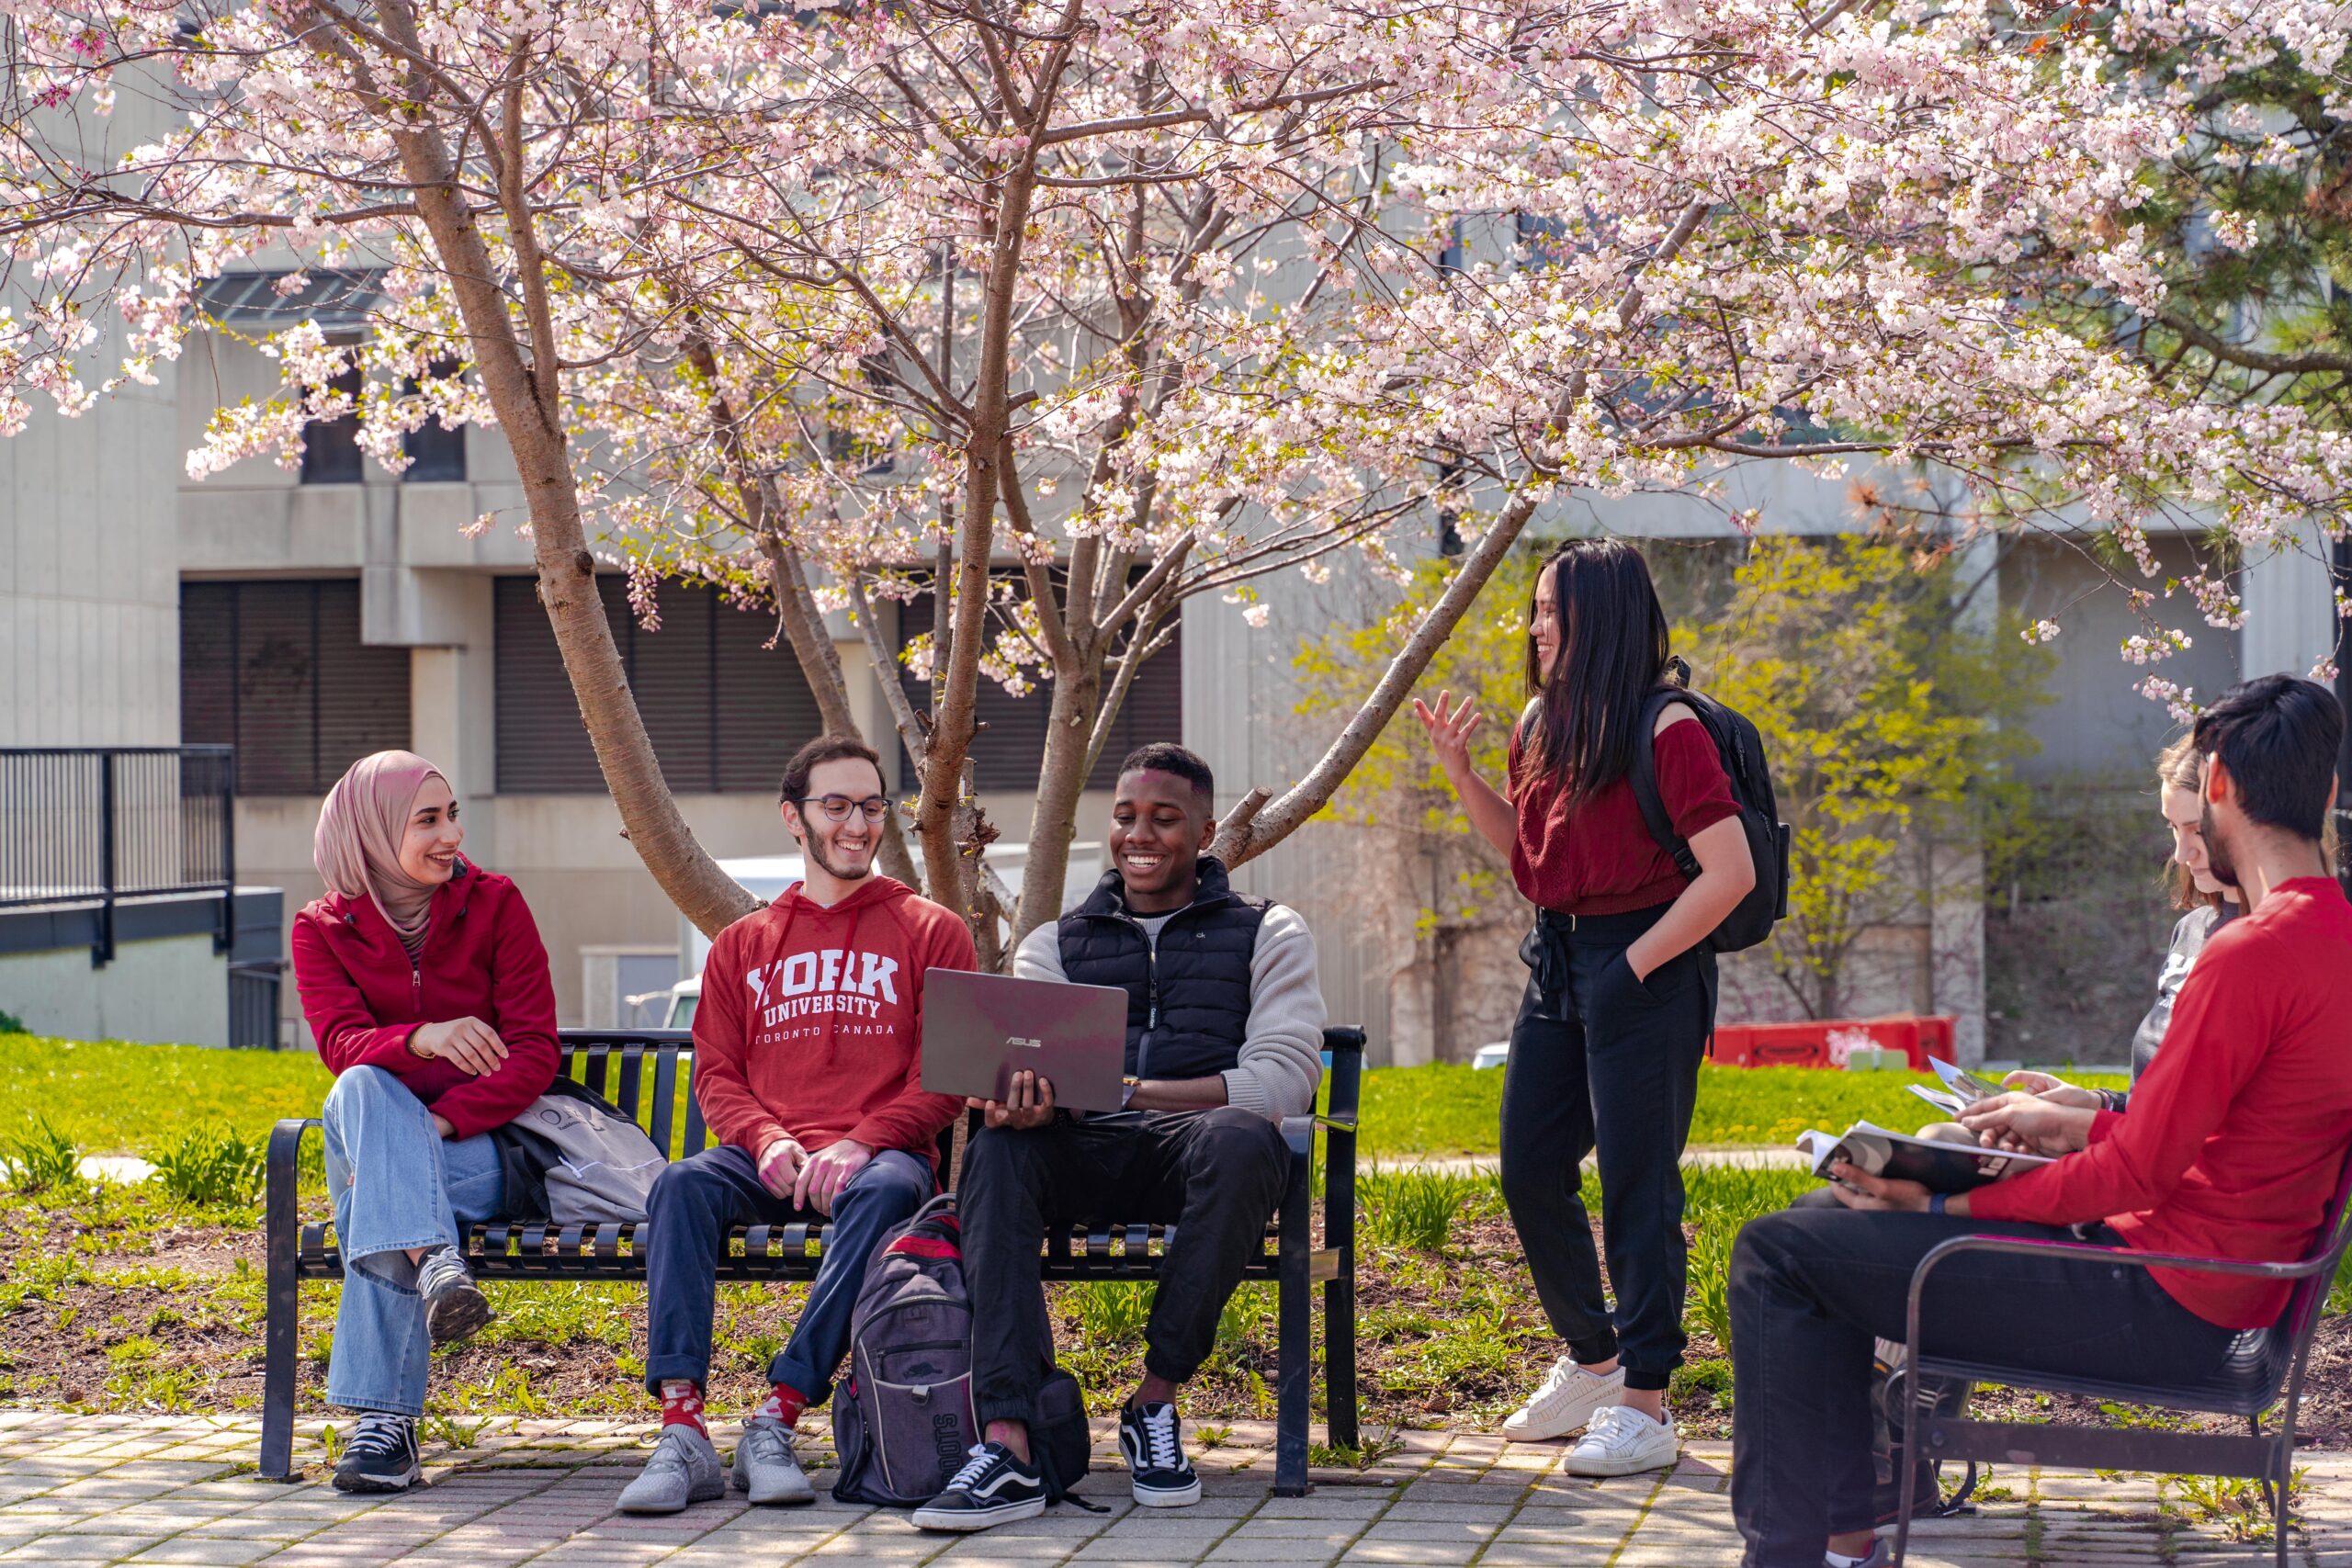 York students chatting outdoors, spring time